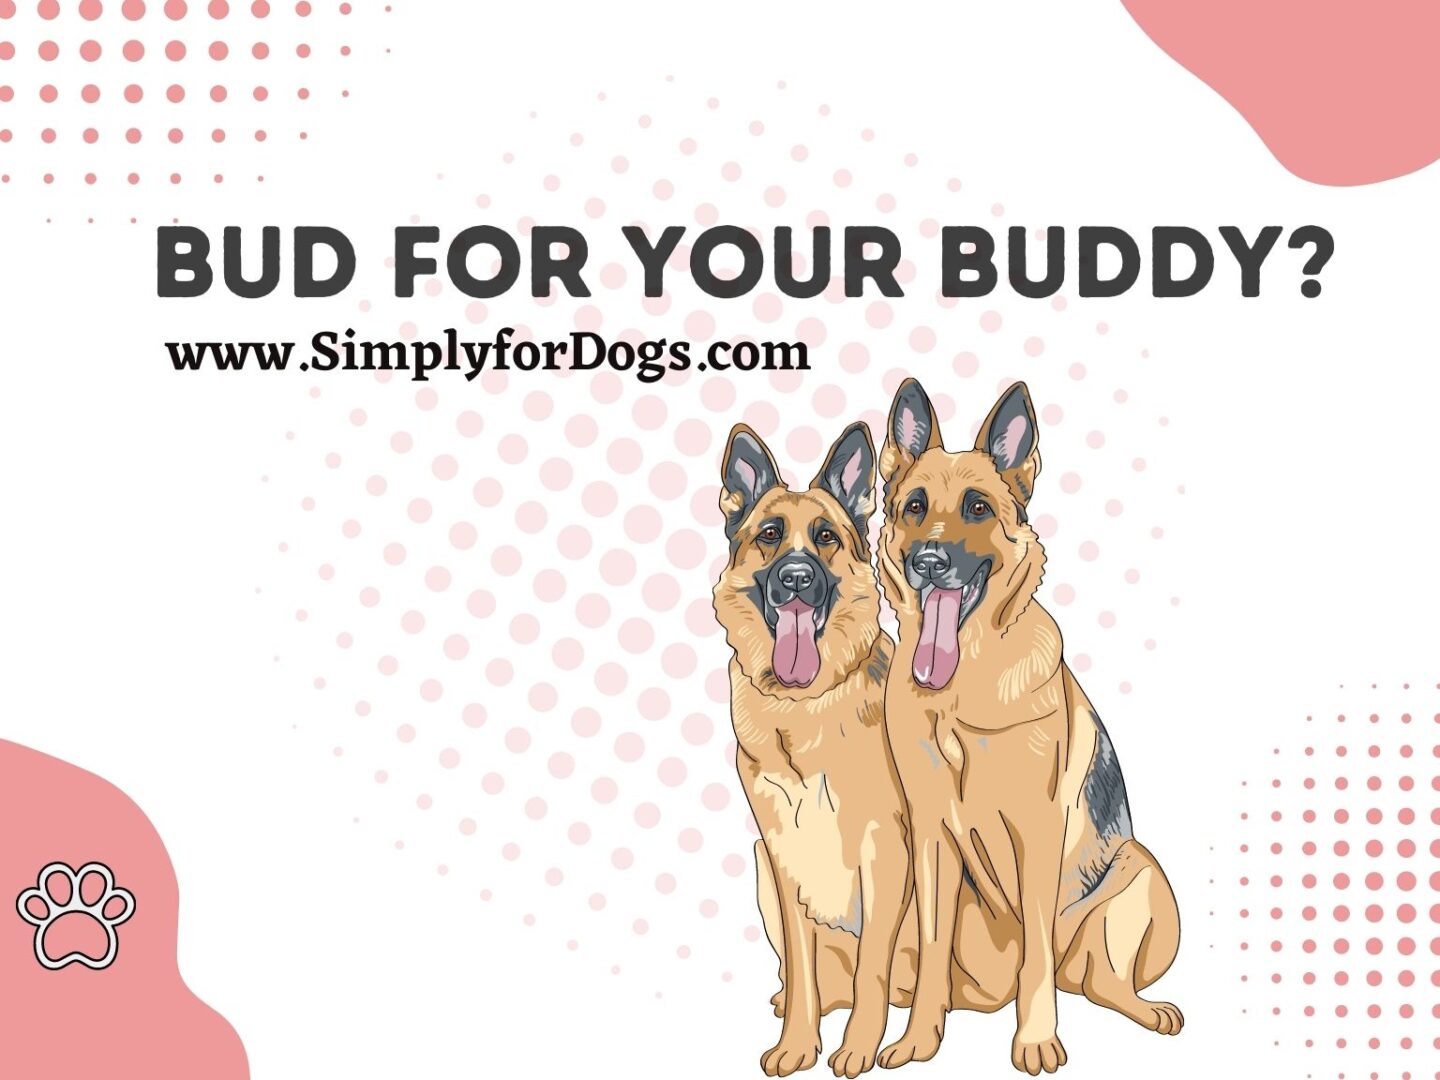 Bud for Your Buddy